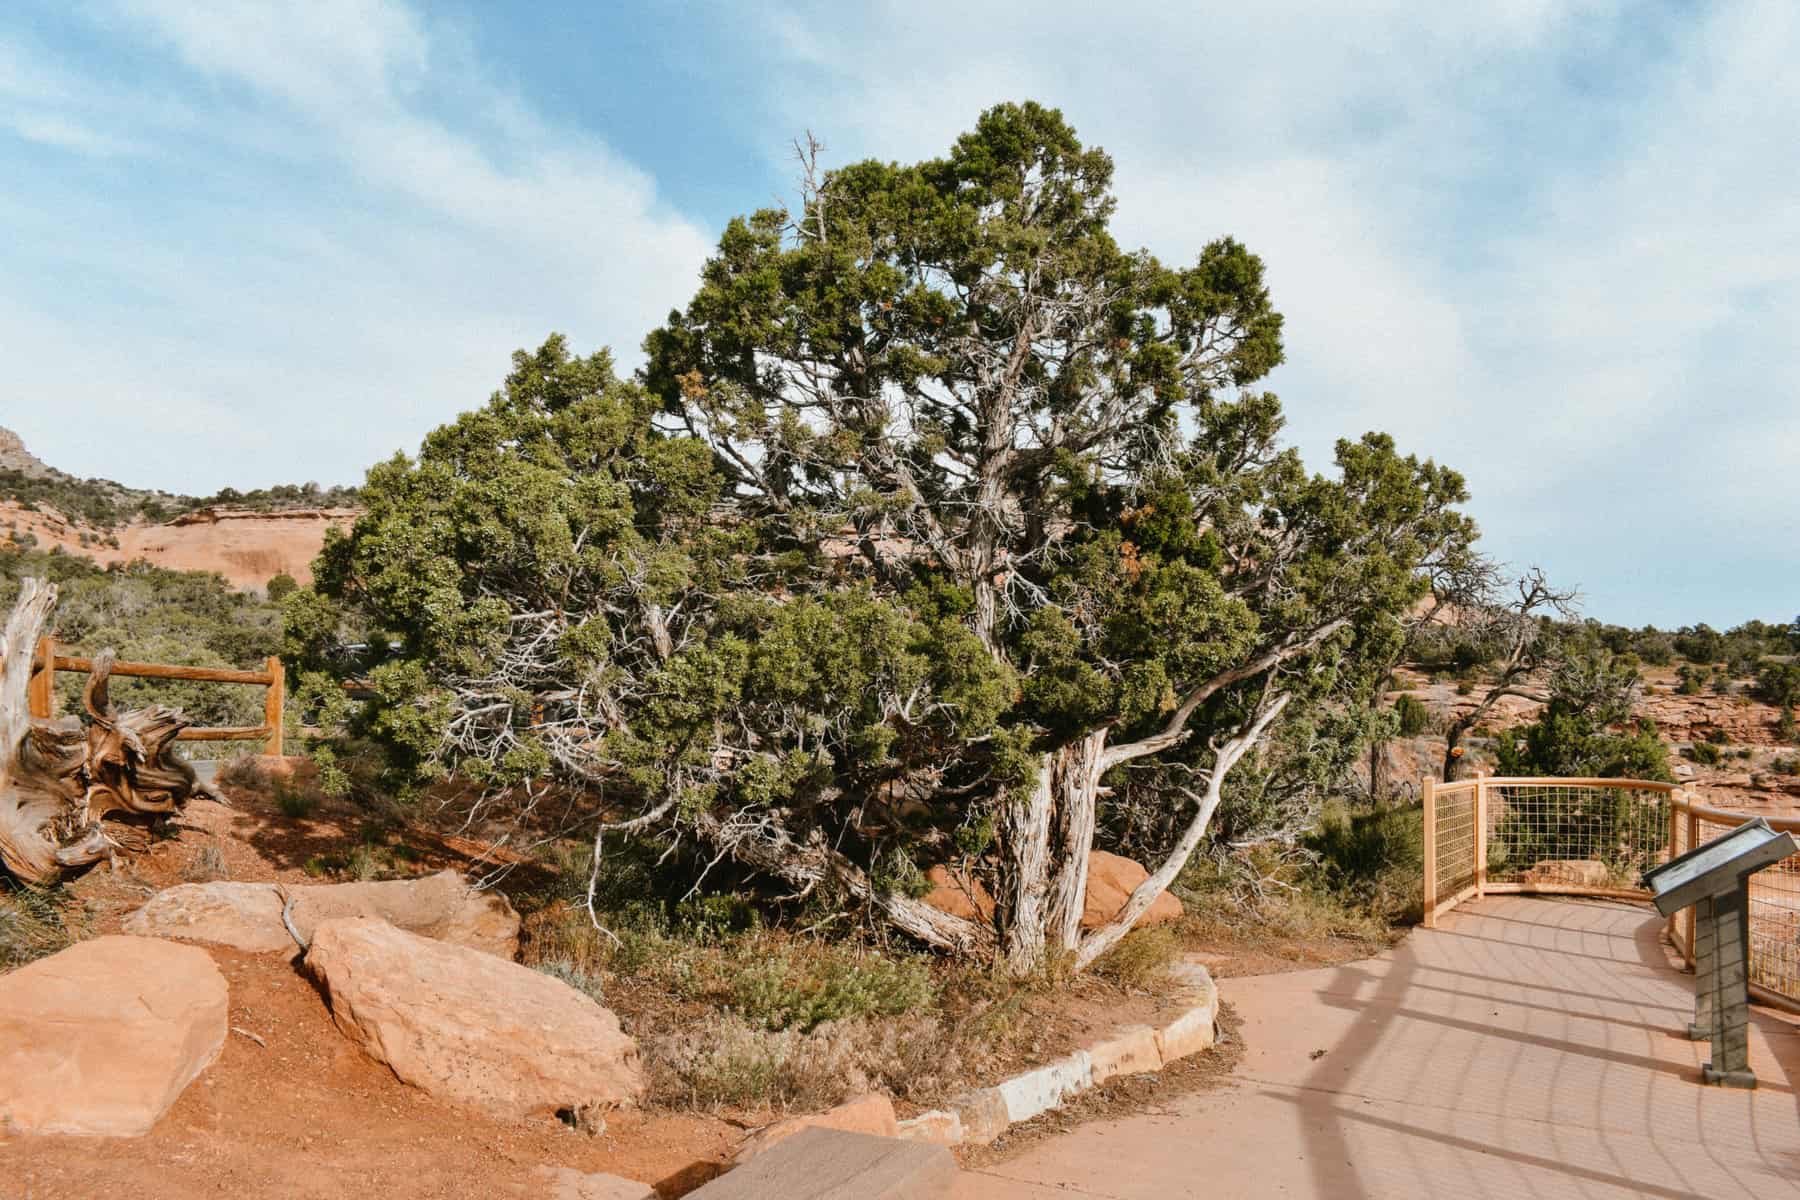 A beautiful tree with red rocks and dirt surrounding it.